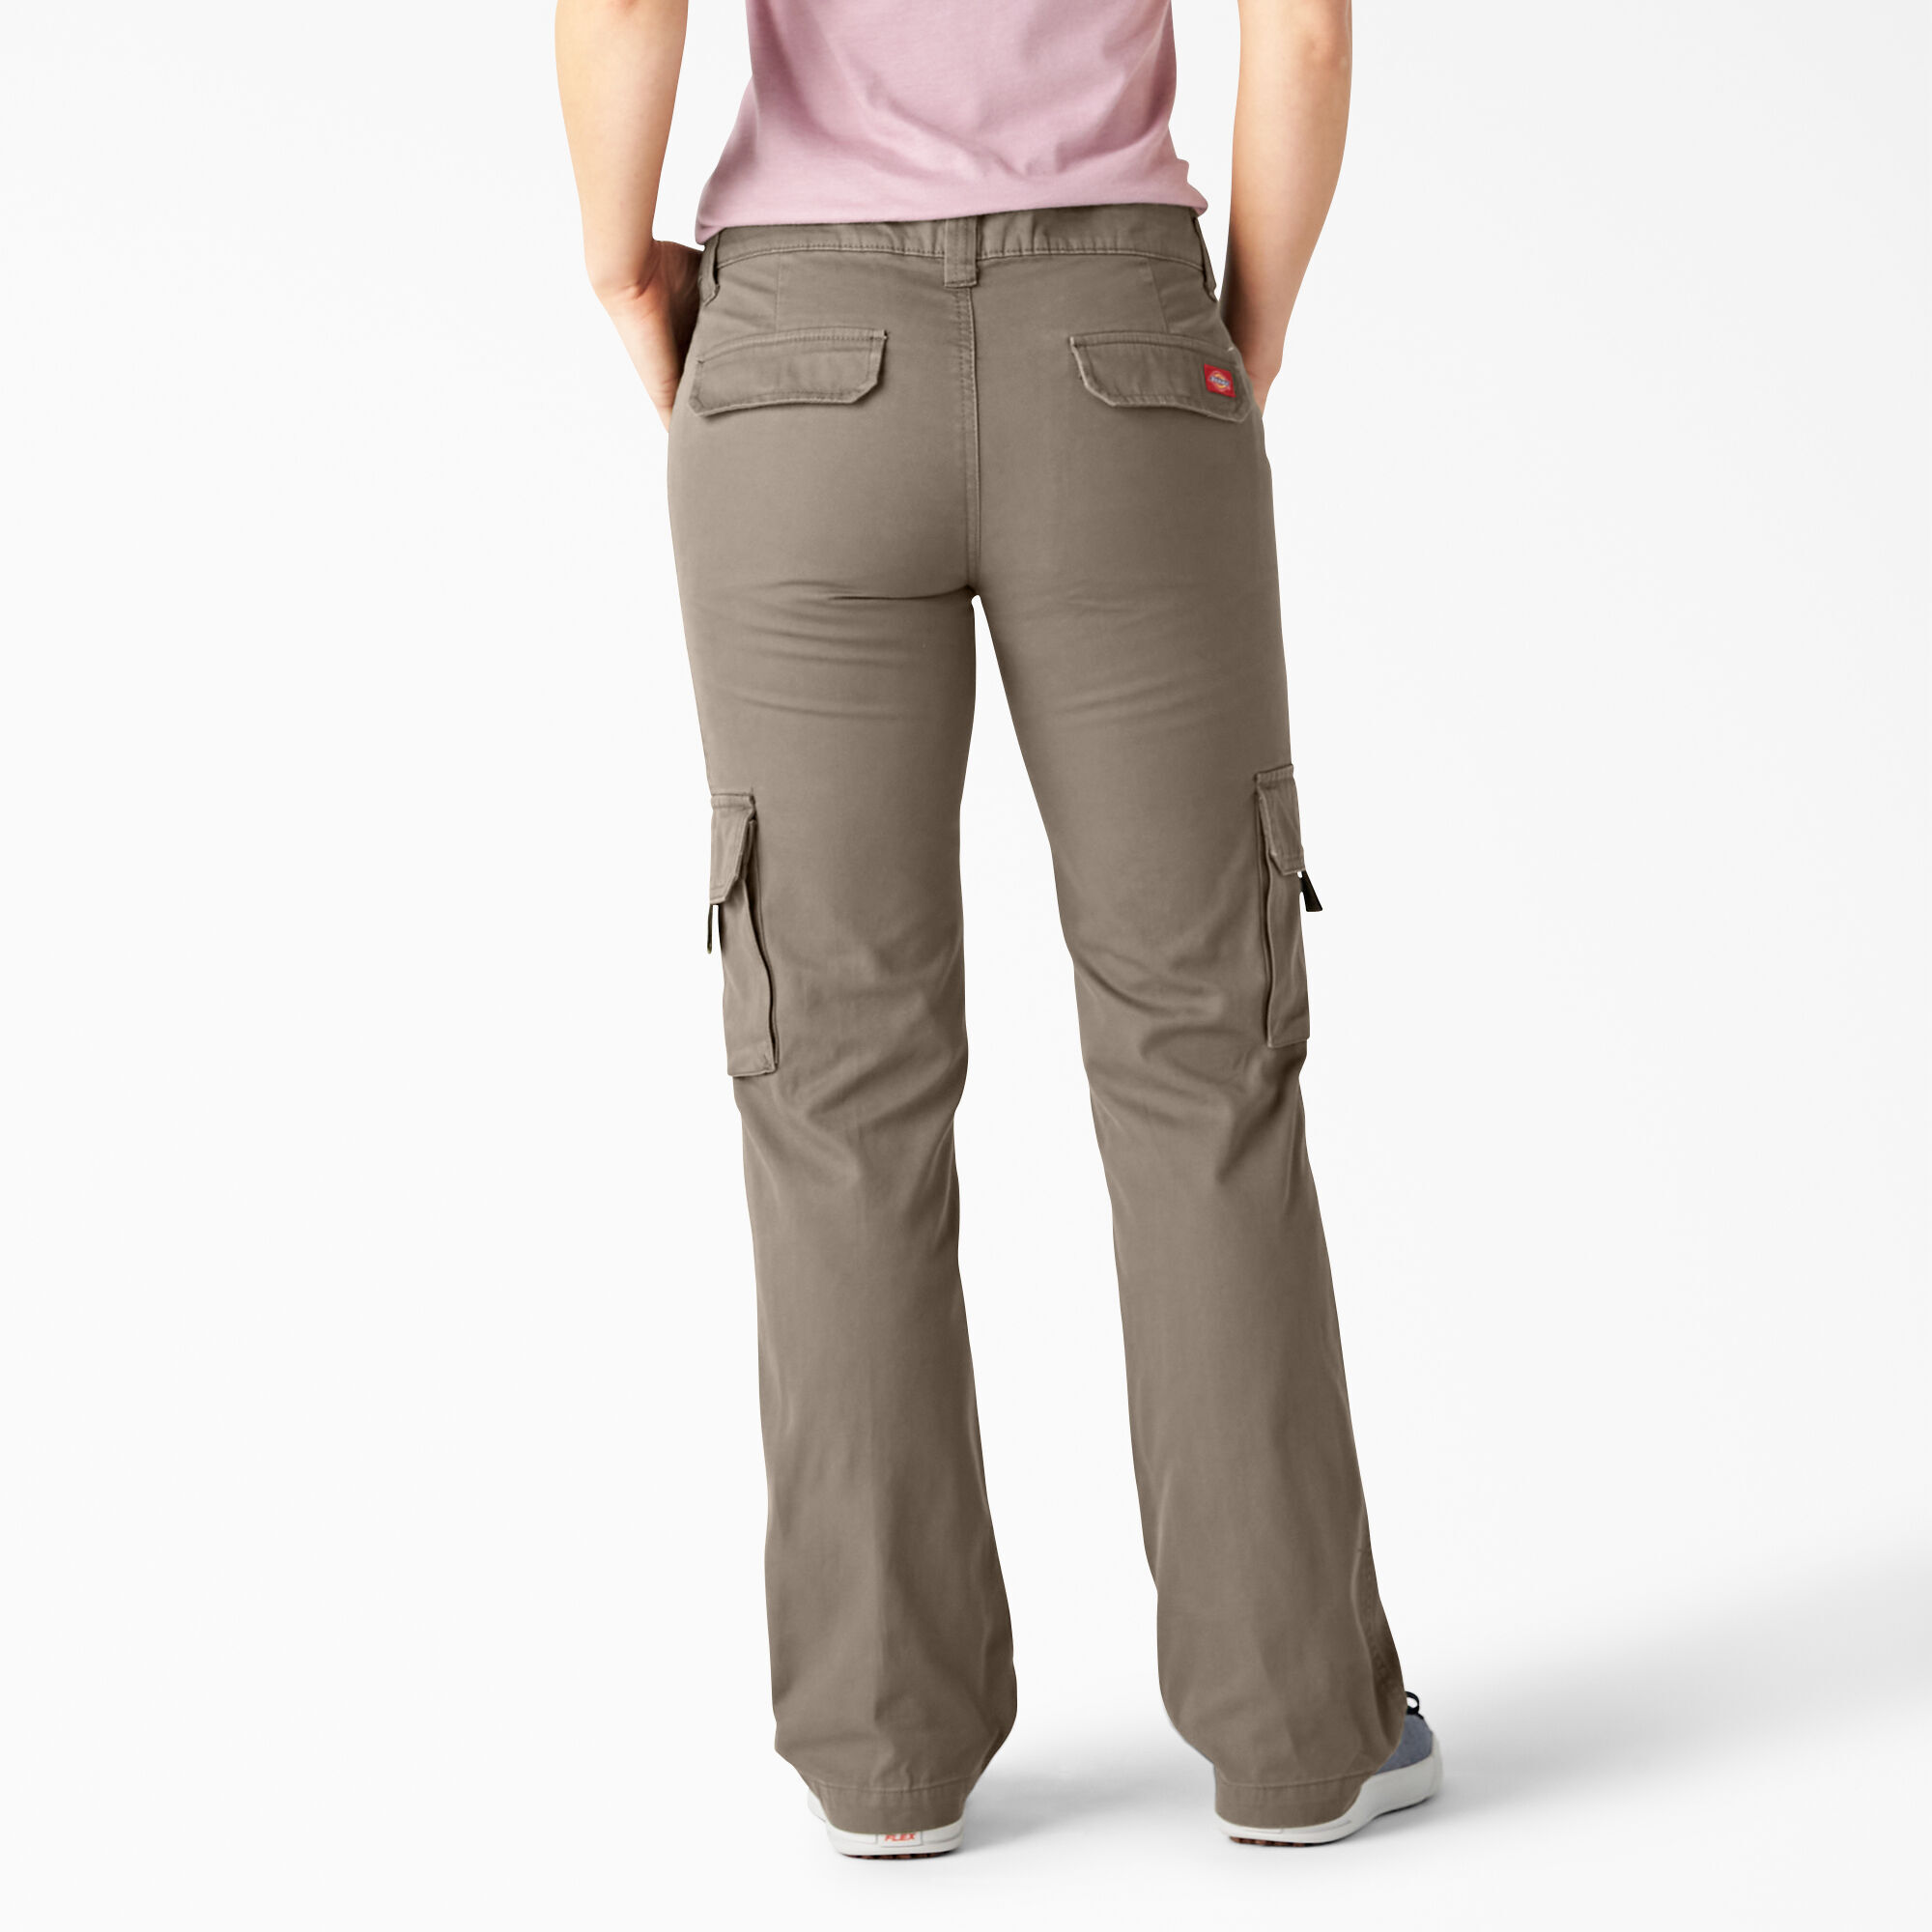 women's relaxed fit cargo pants